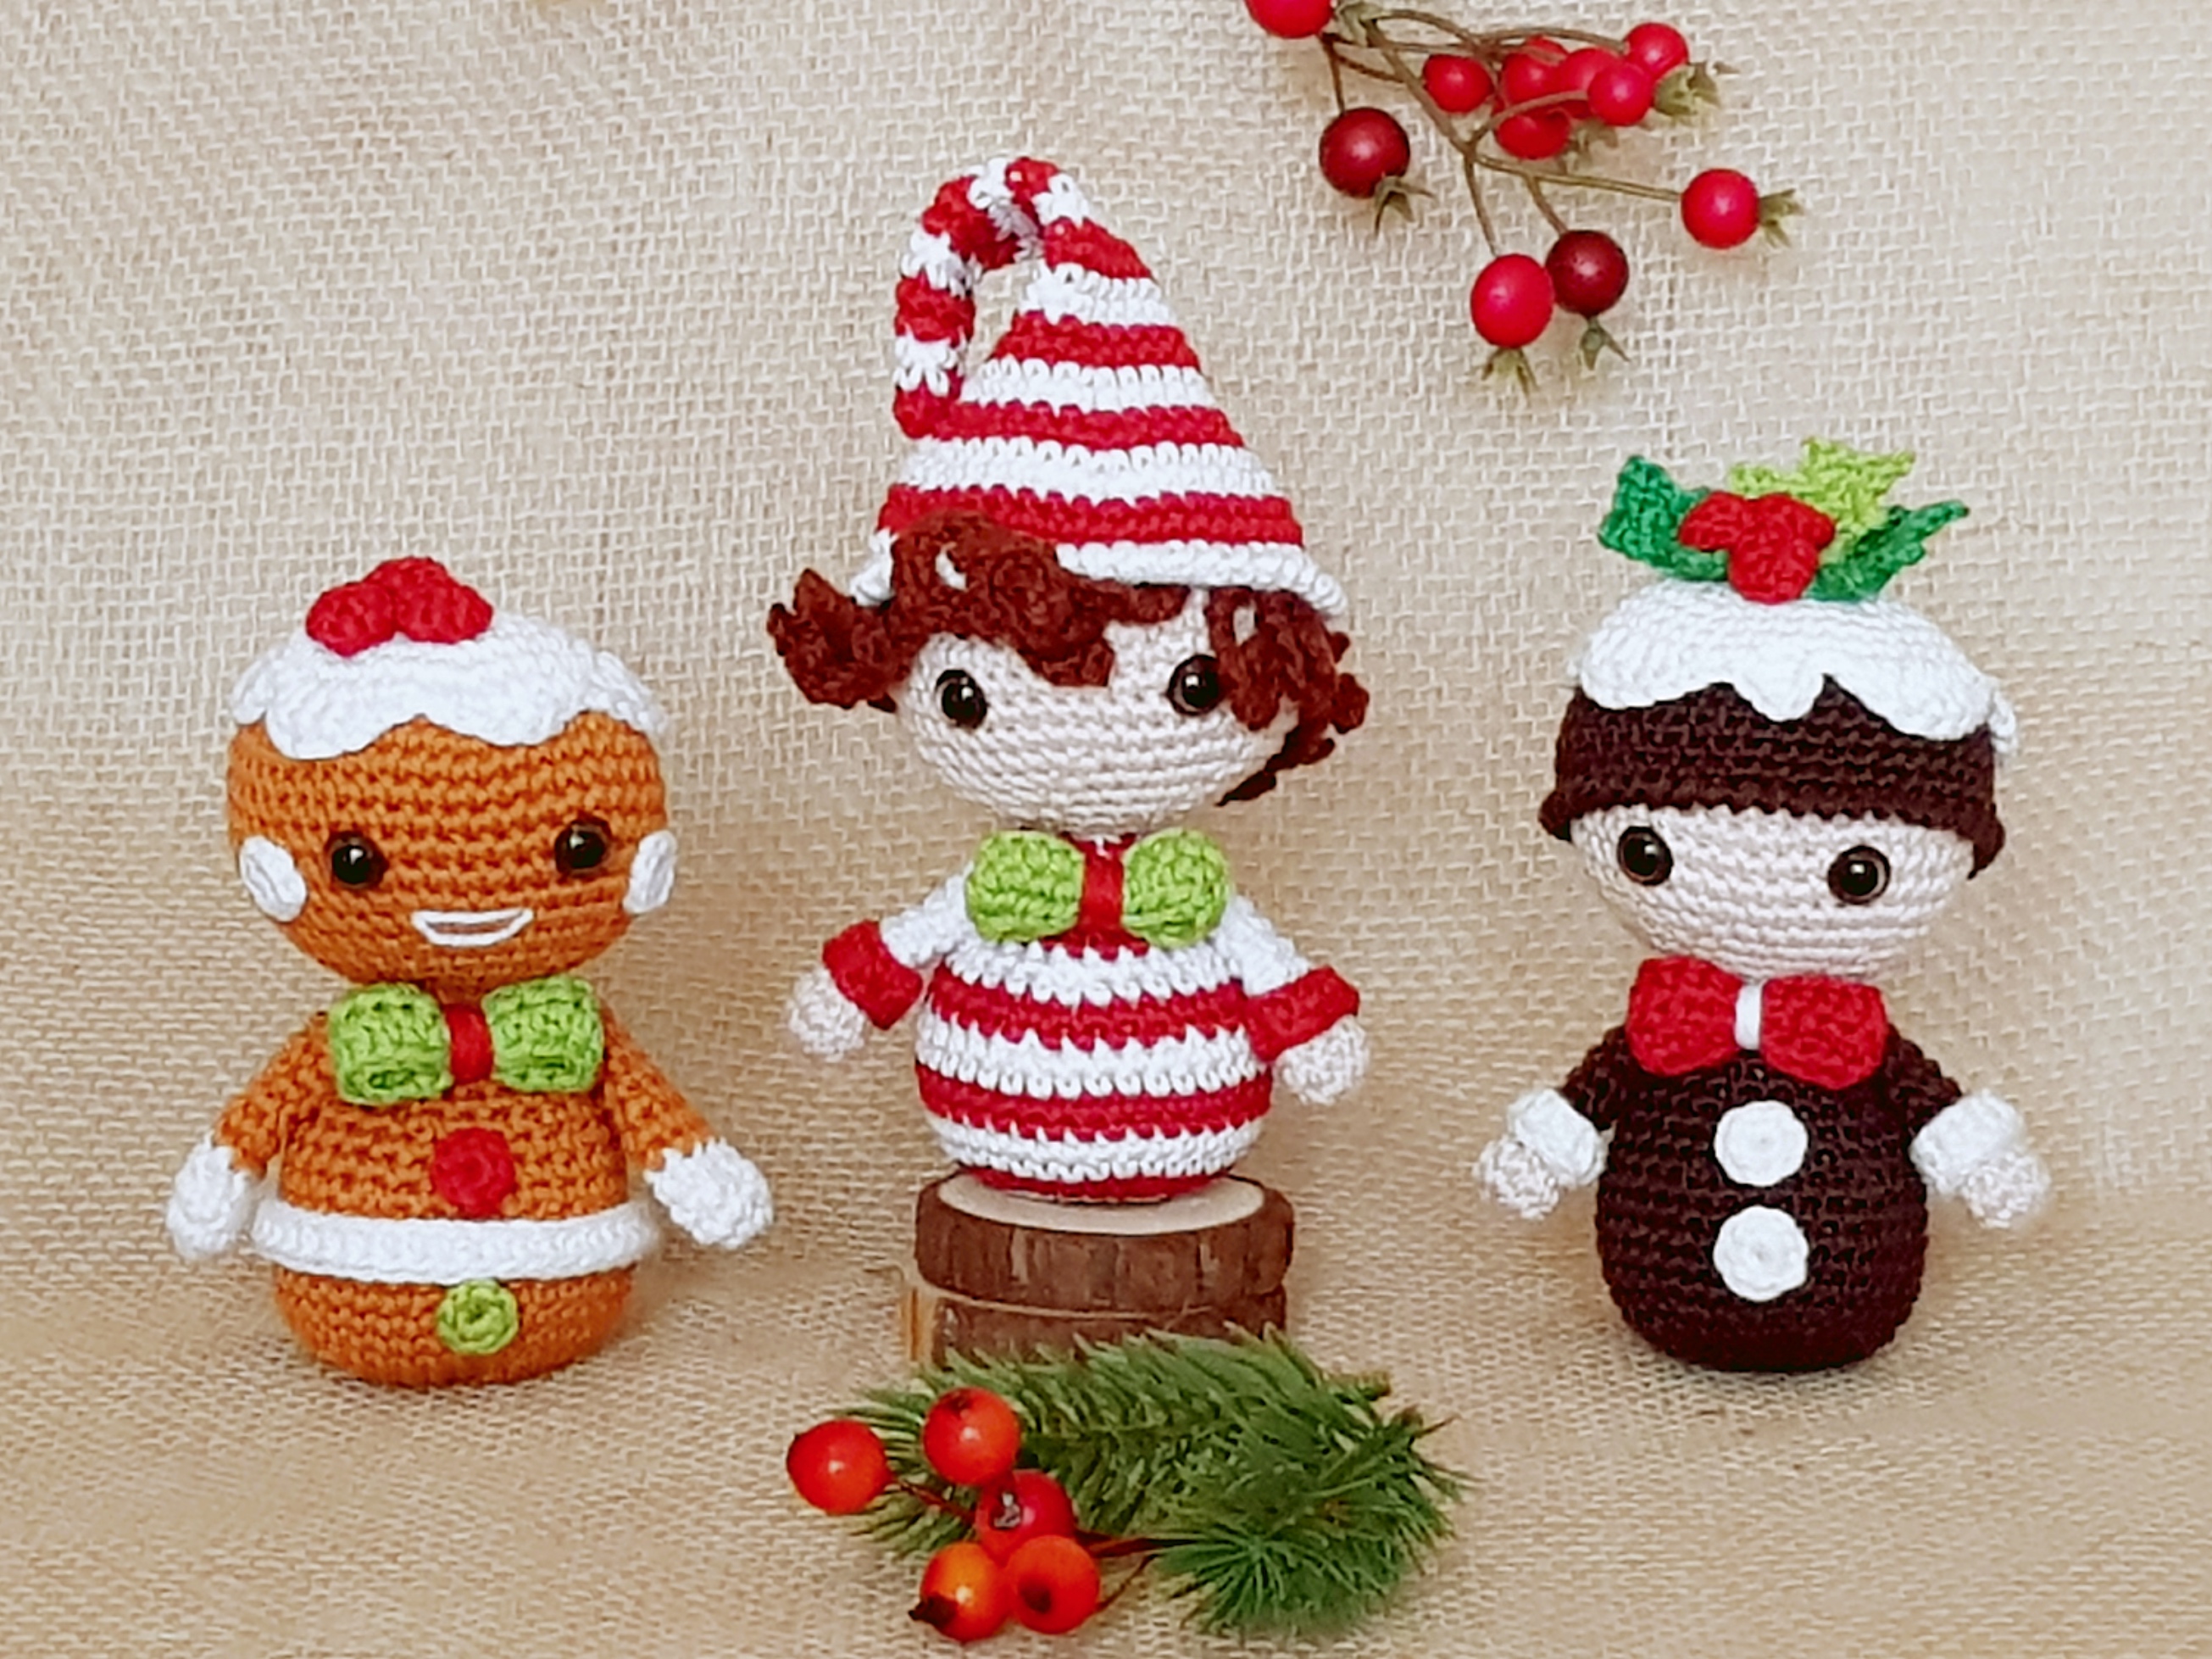 Set of 6 Green Crocheted Candy Cane Holders Christmas.